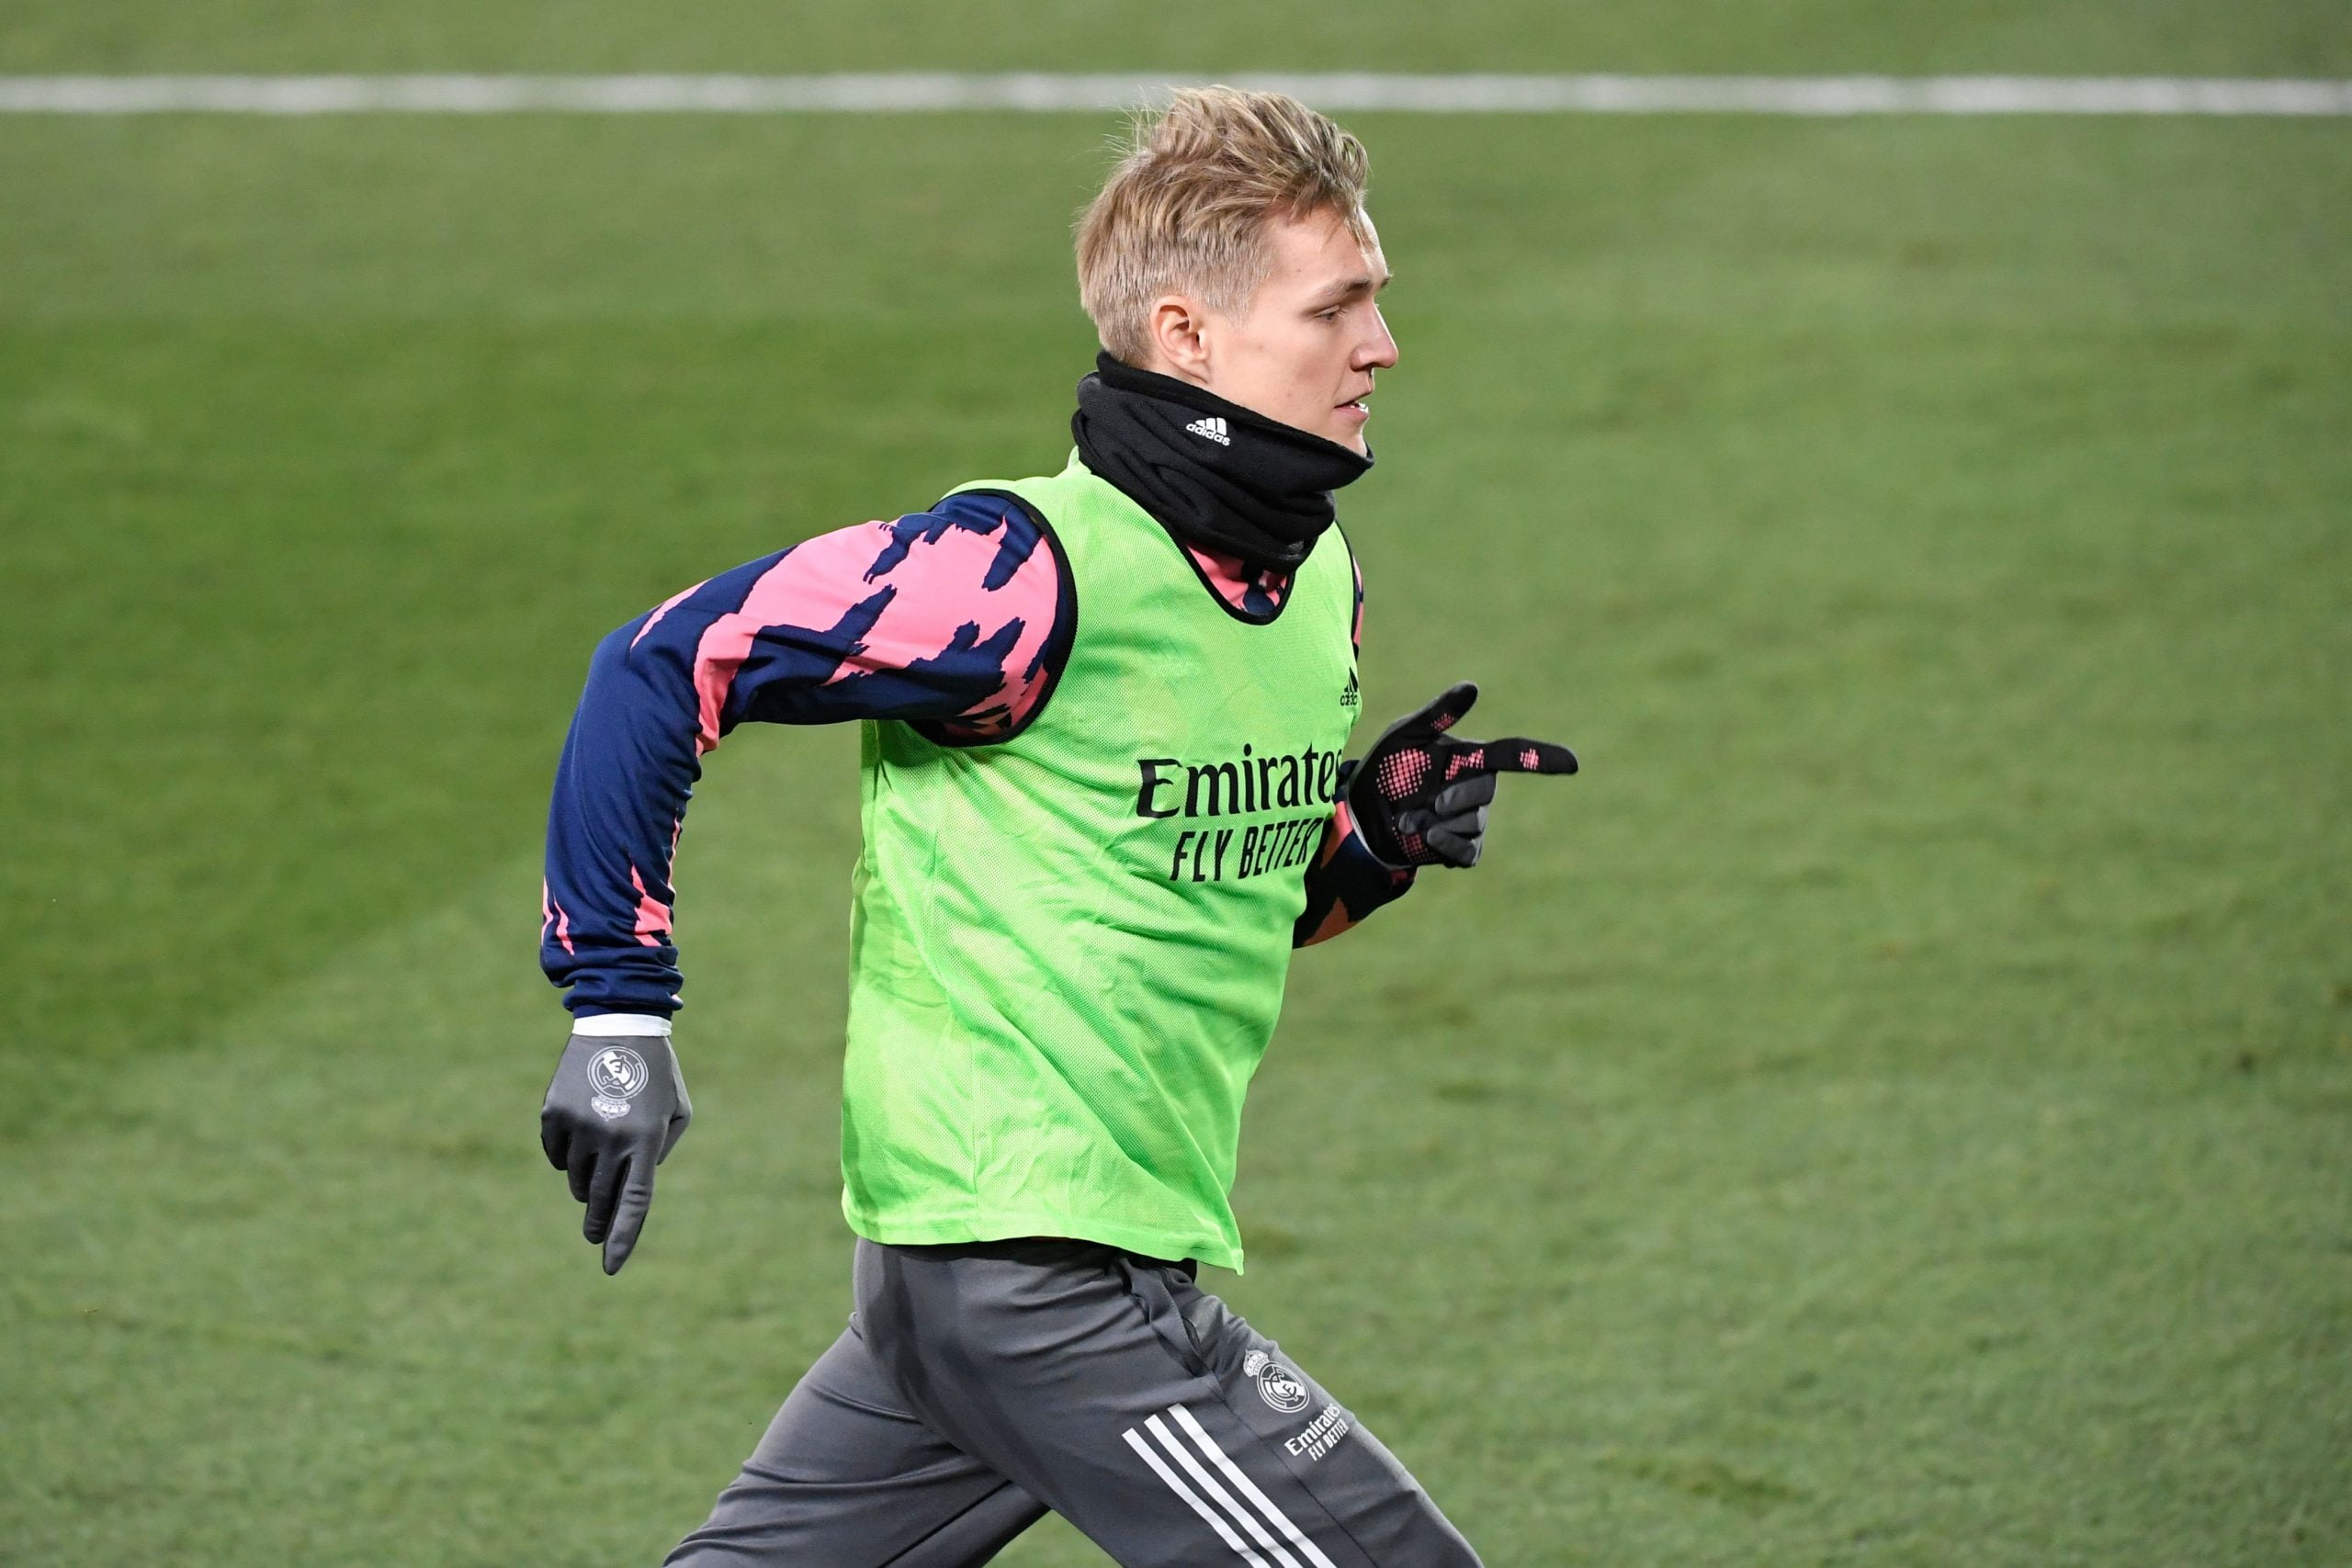 Arsenal Vs Manchester United Tactical Preview - Will Odegaard be an option?